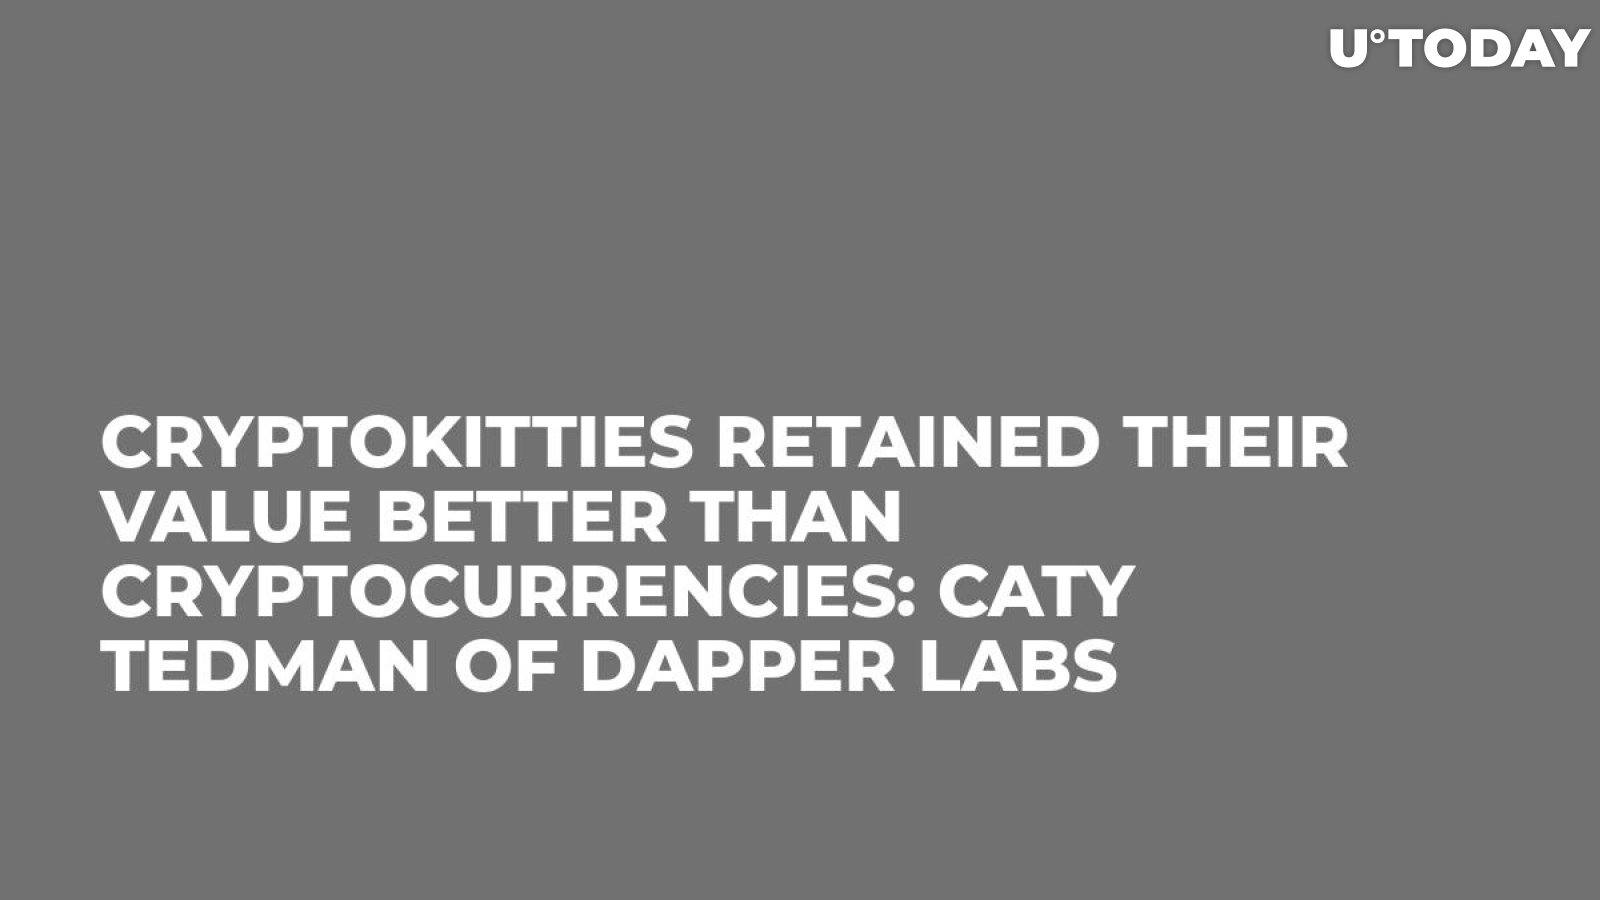 CryptoKitties Retained Their Value Better Than Cryptocurrencies: Caty Tedman of Dapper Labs